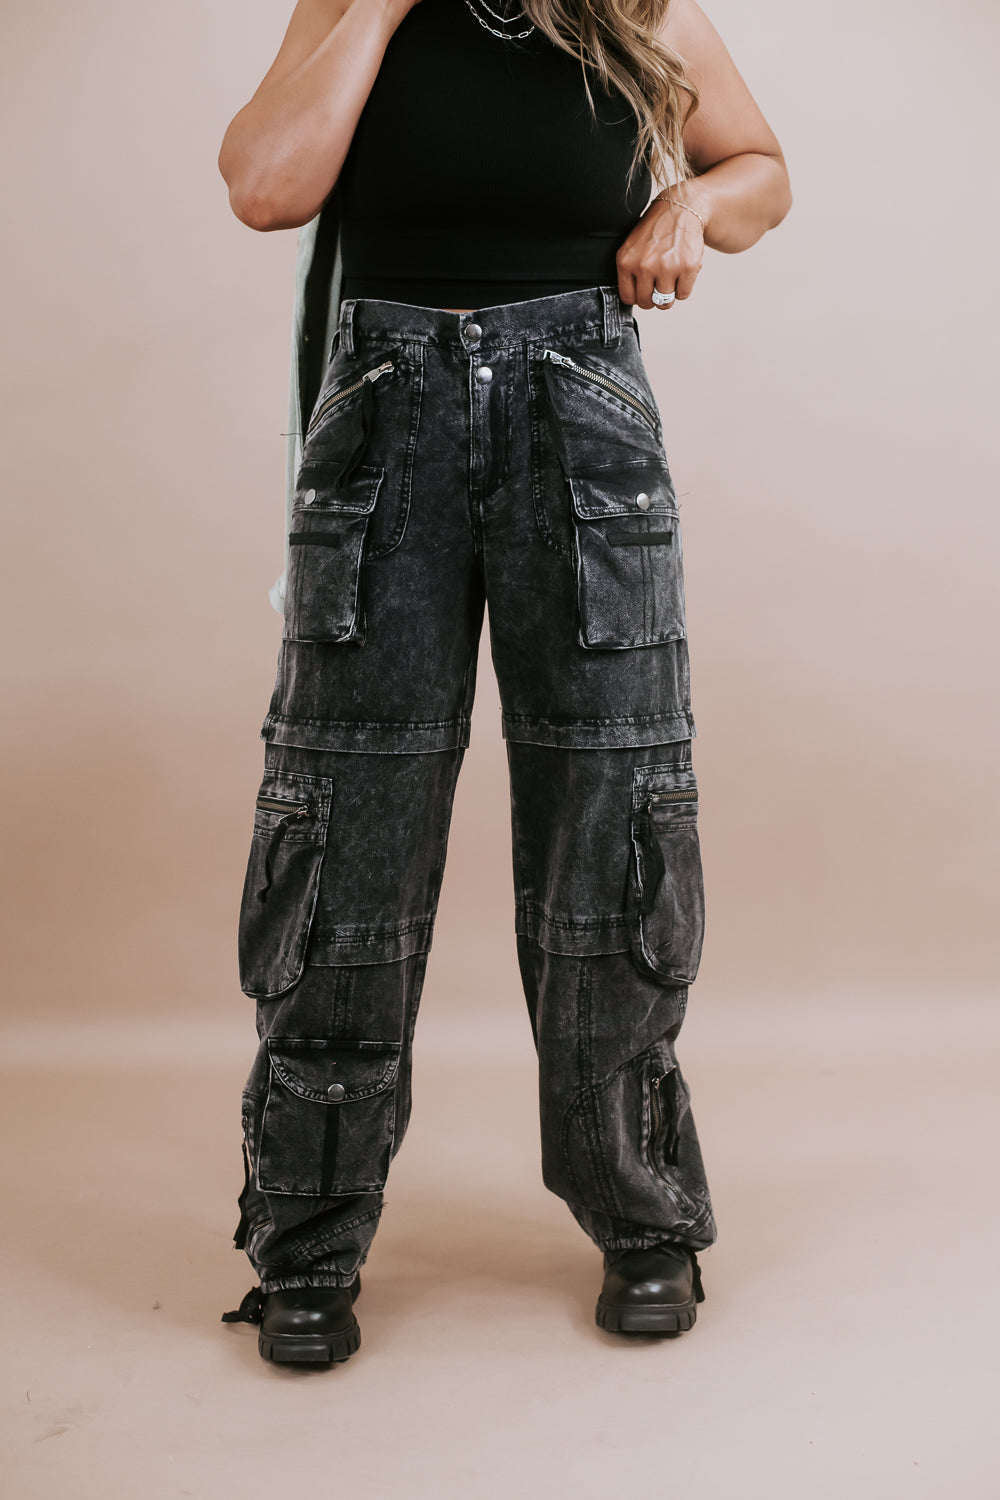 Mineral Washed Cargo Pants, Black